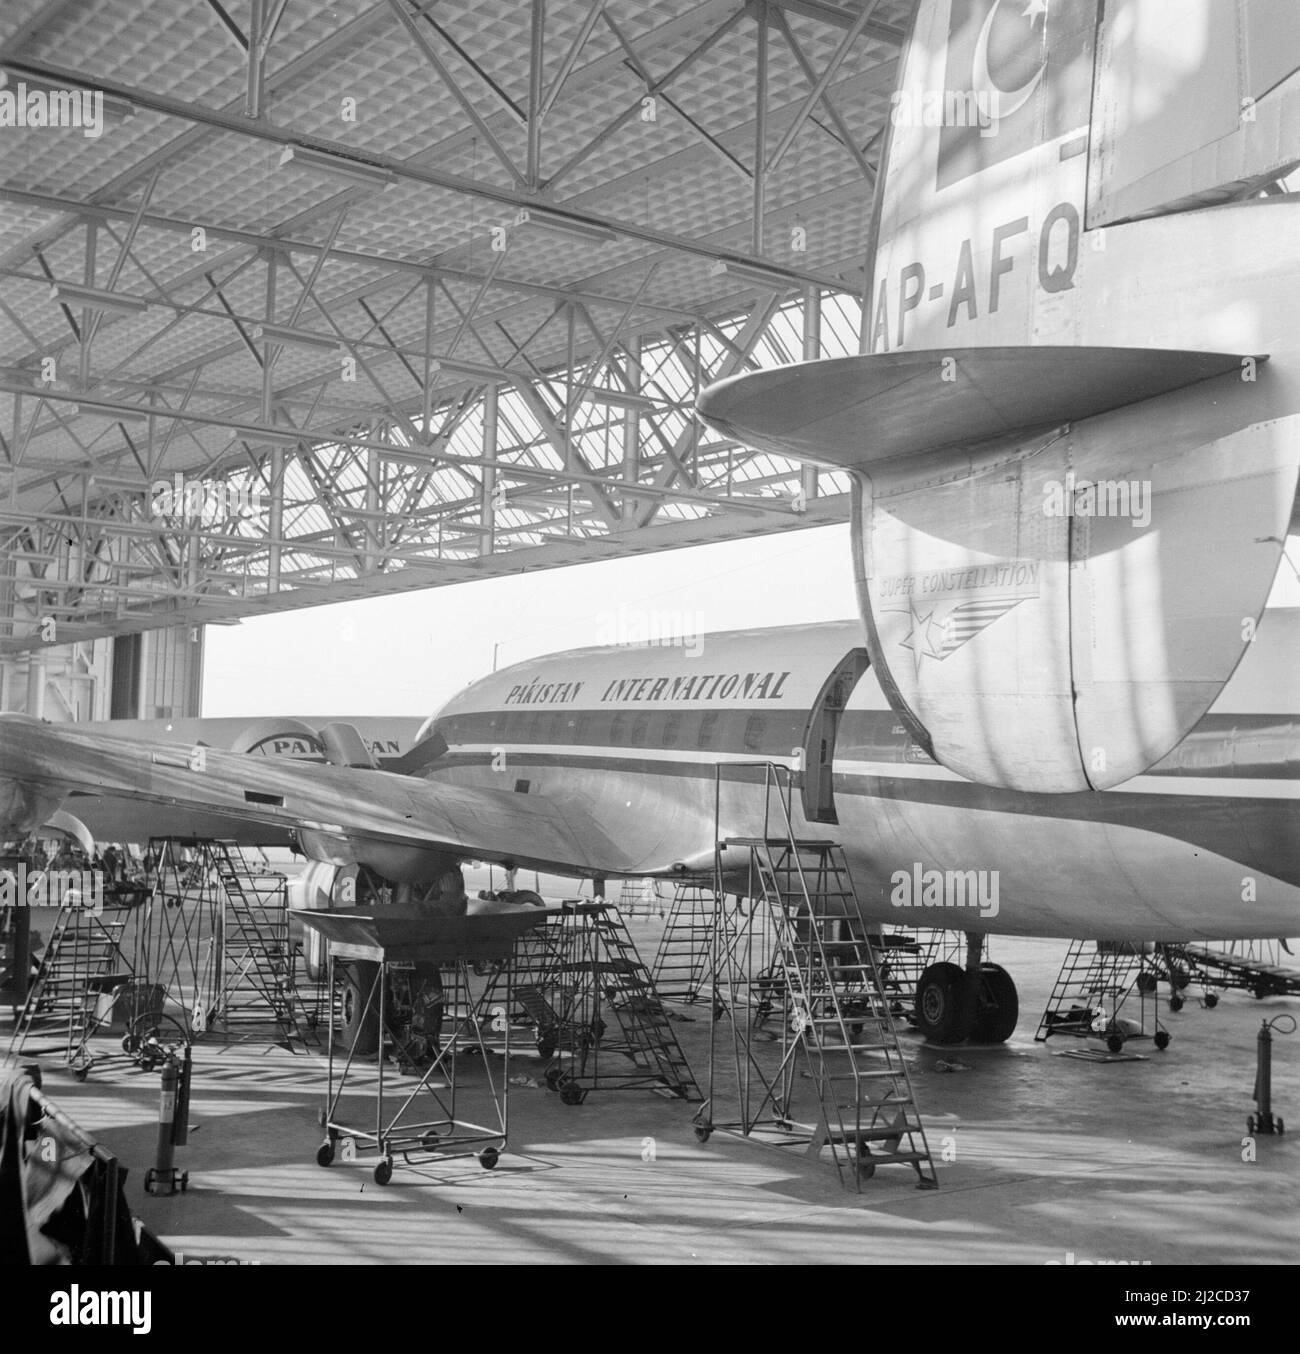 Inside plane Black and White Stock Photos & Images - Alamy